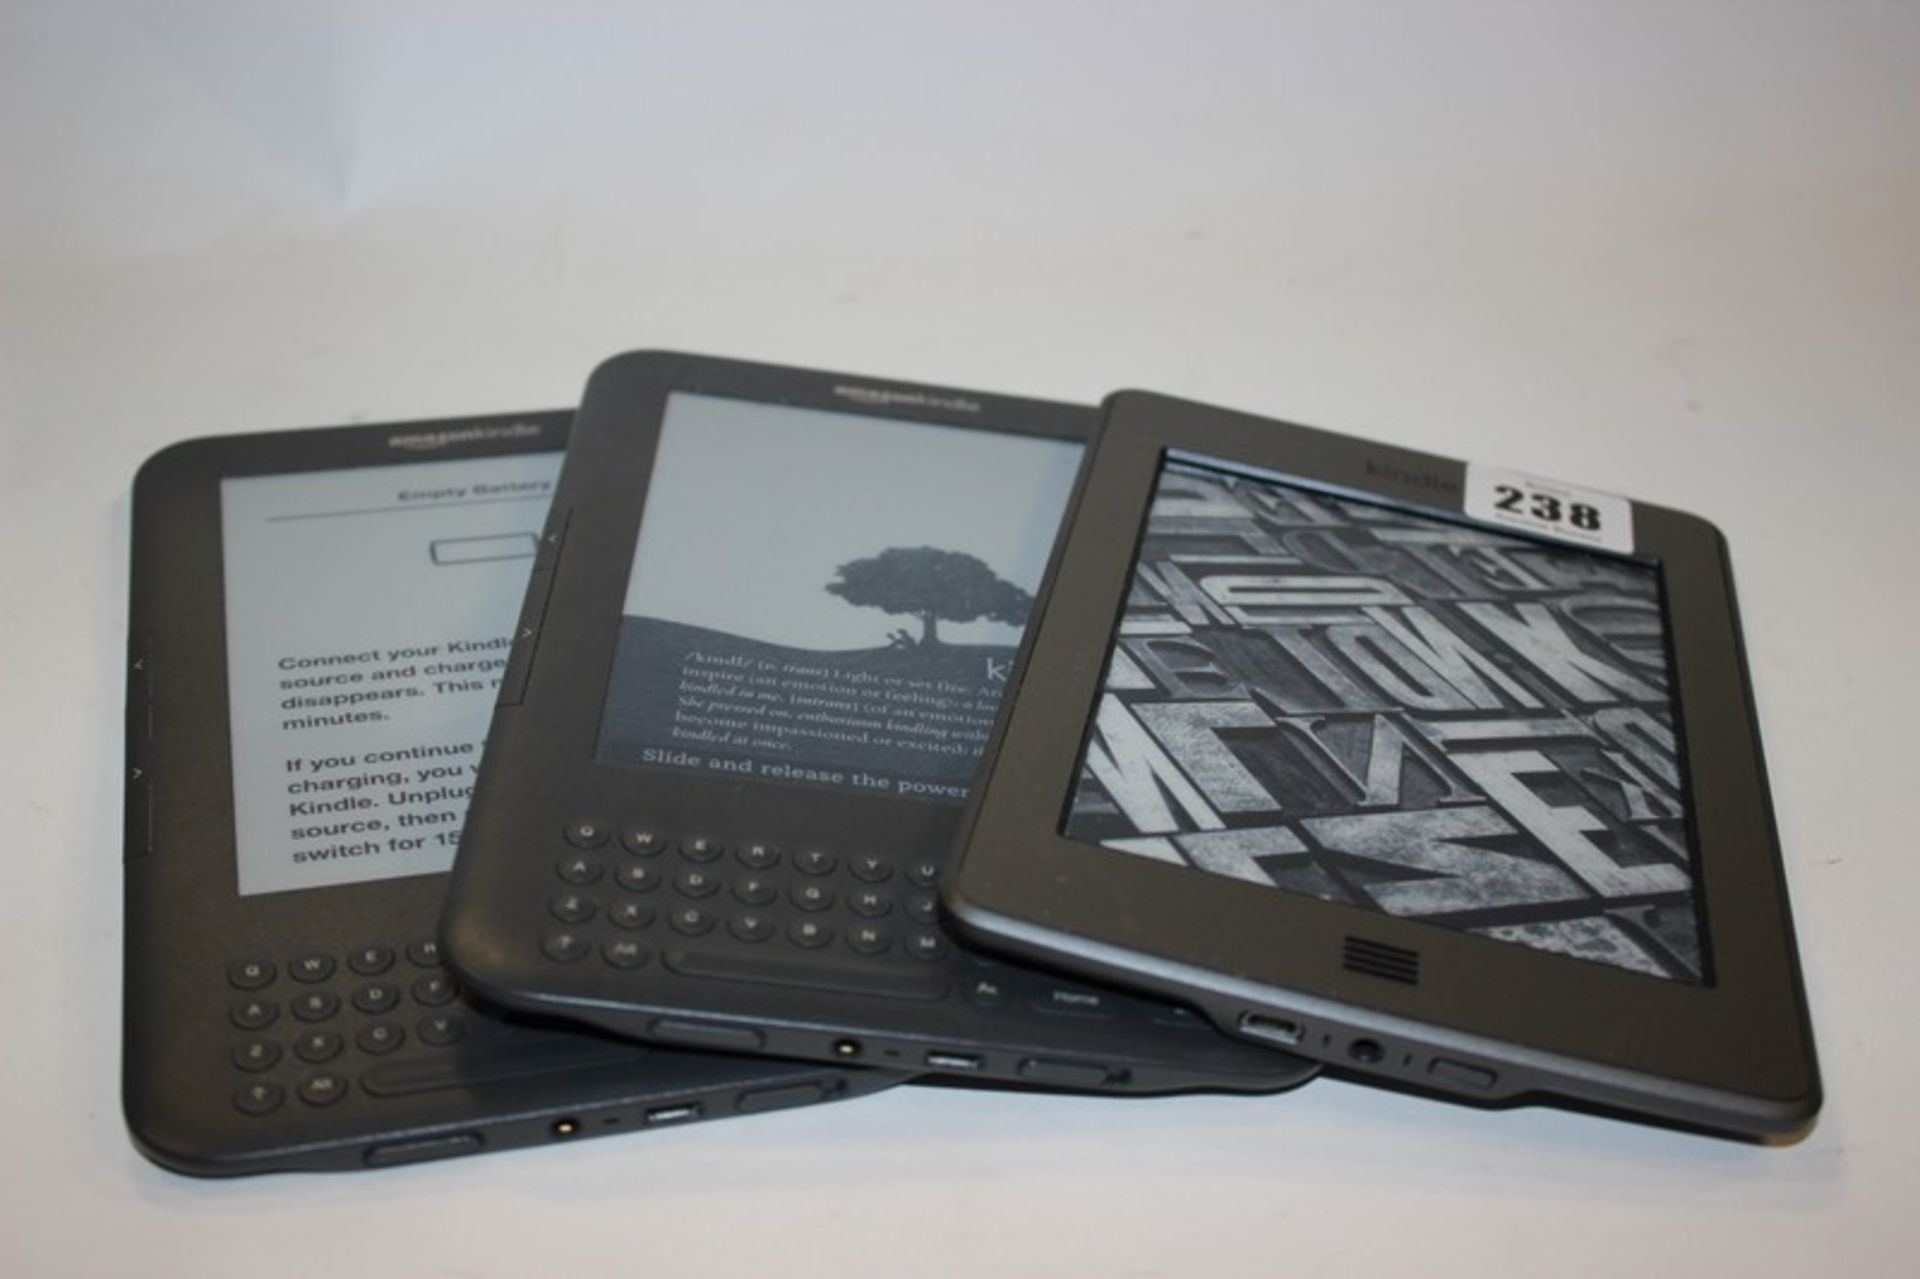 Two Kindle Keyboard model: D00901 and a Kindle Touch model: D01200.